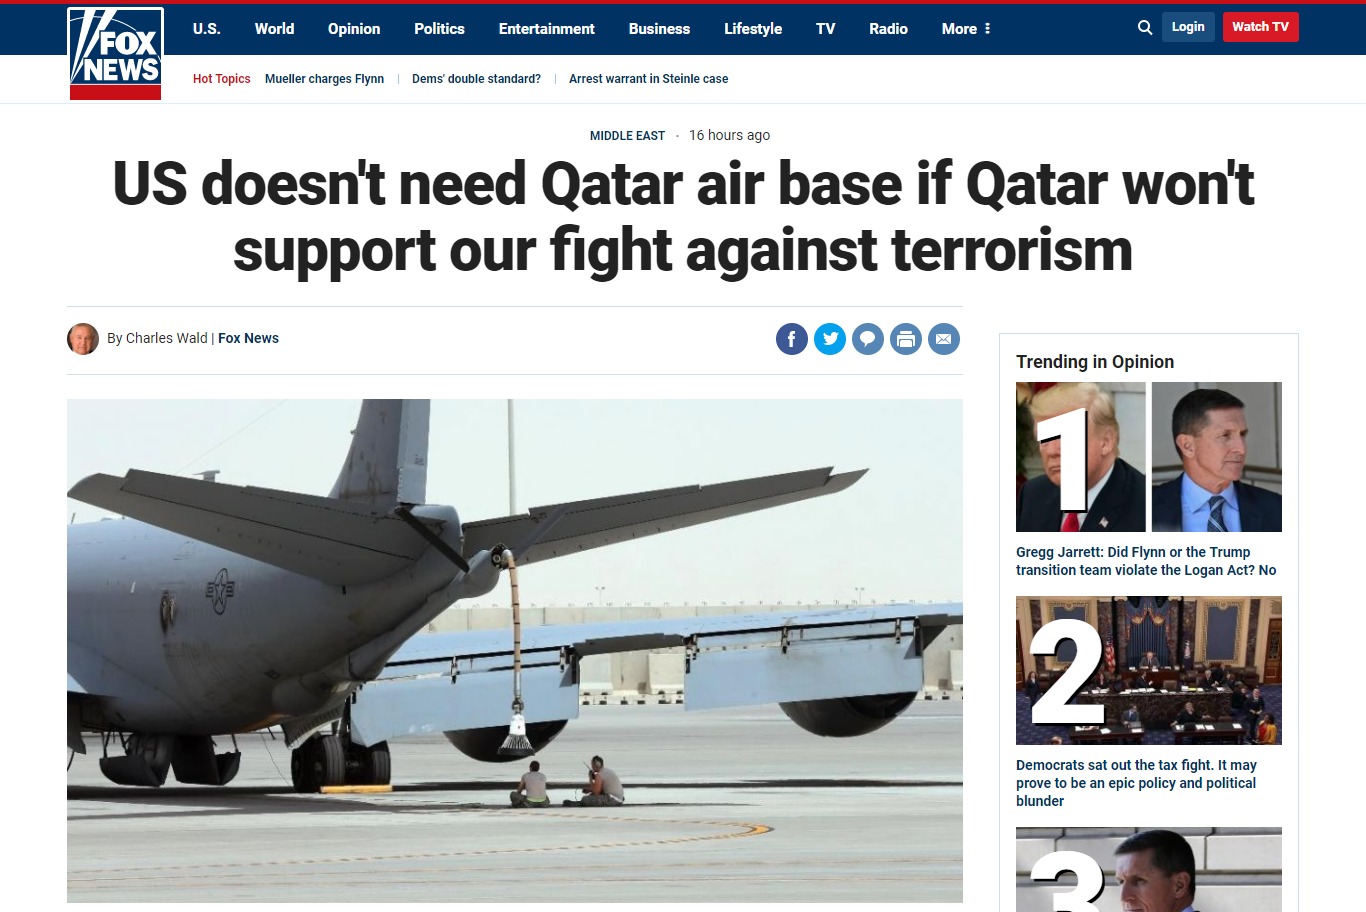 screencapture-foxnews-opinion-2017-12-01-us-doesnt-need-qatar-air-base-if-qatar-wont-support-our-fight-against-terrorism-html-1512204669520